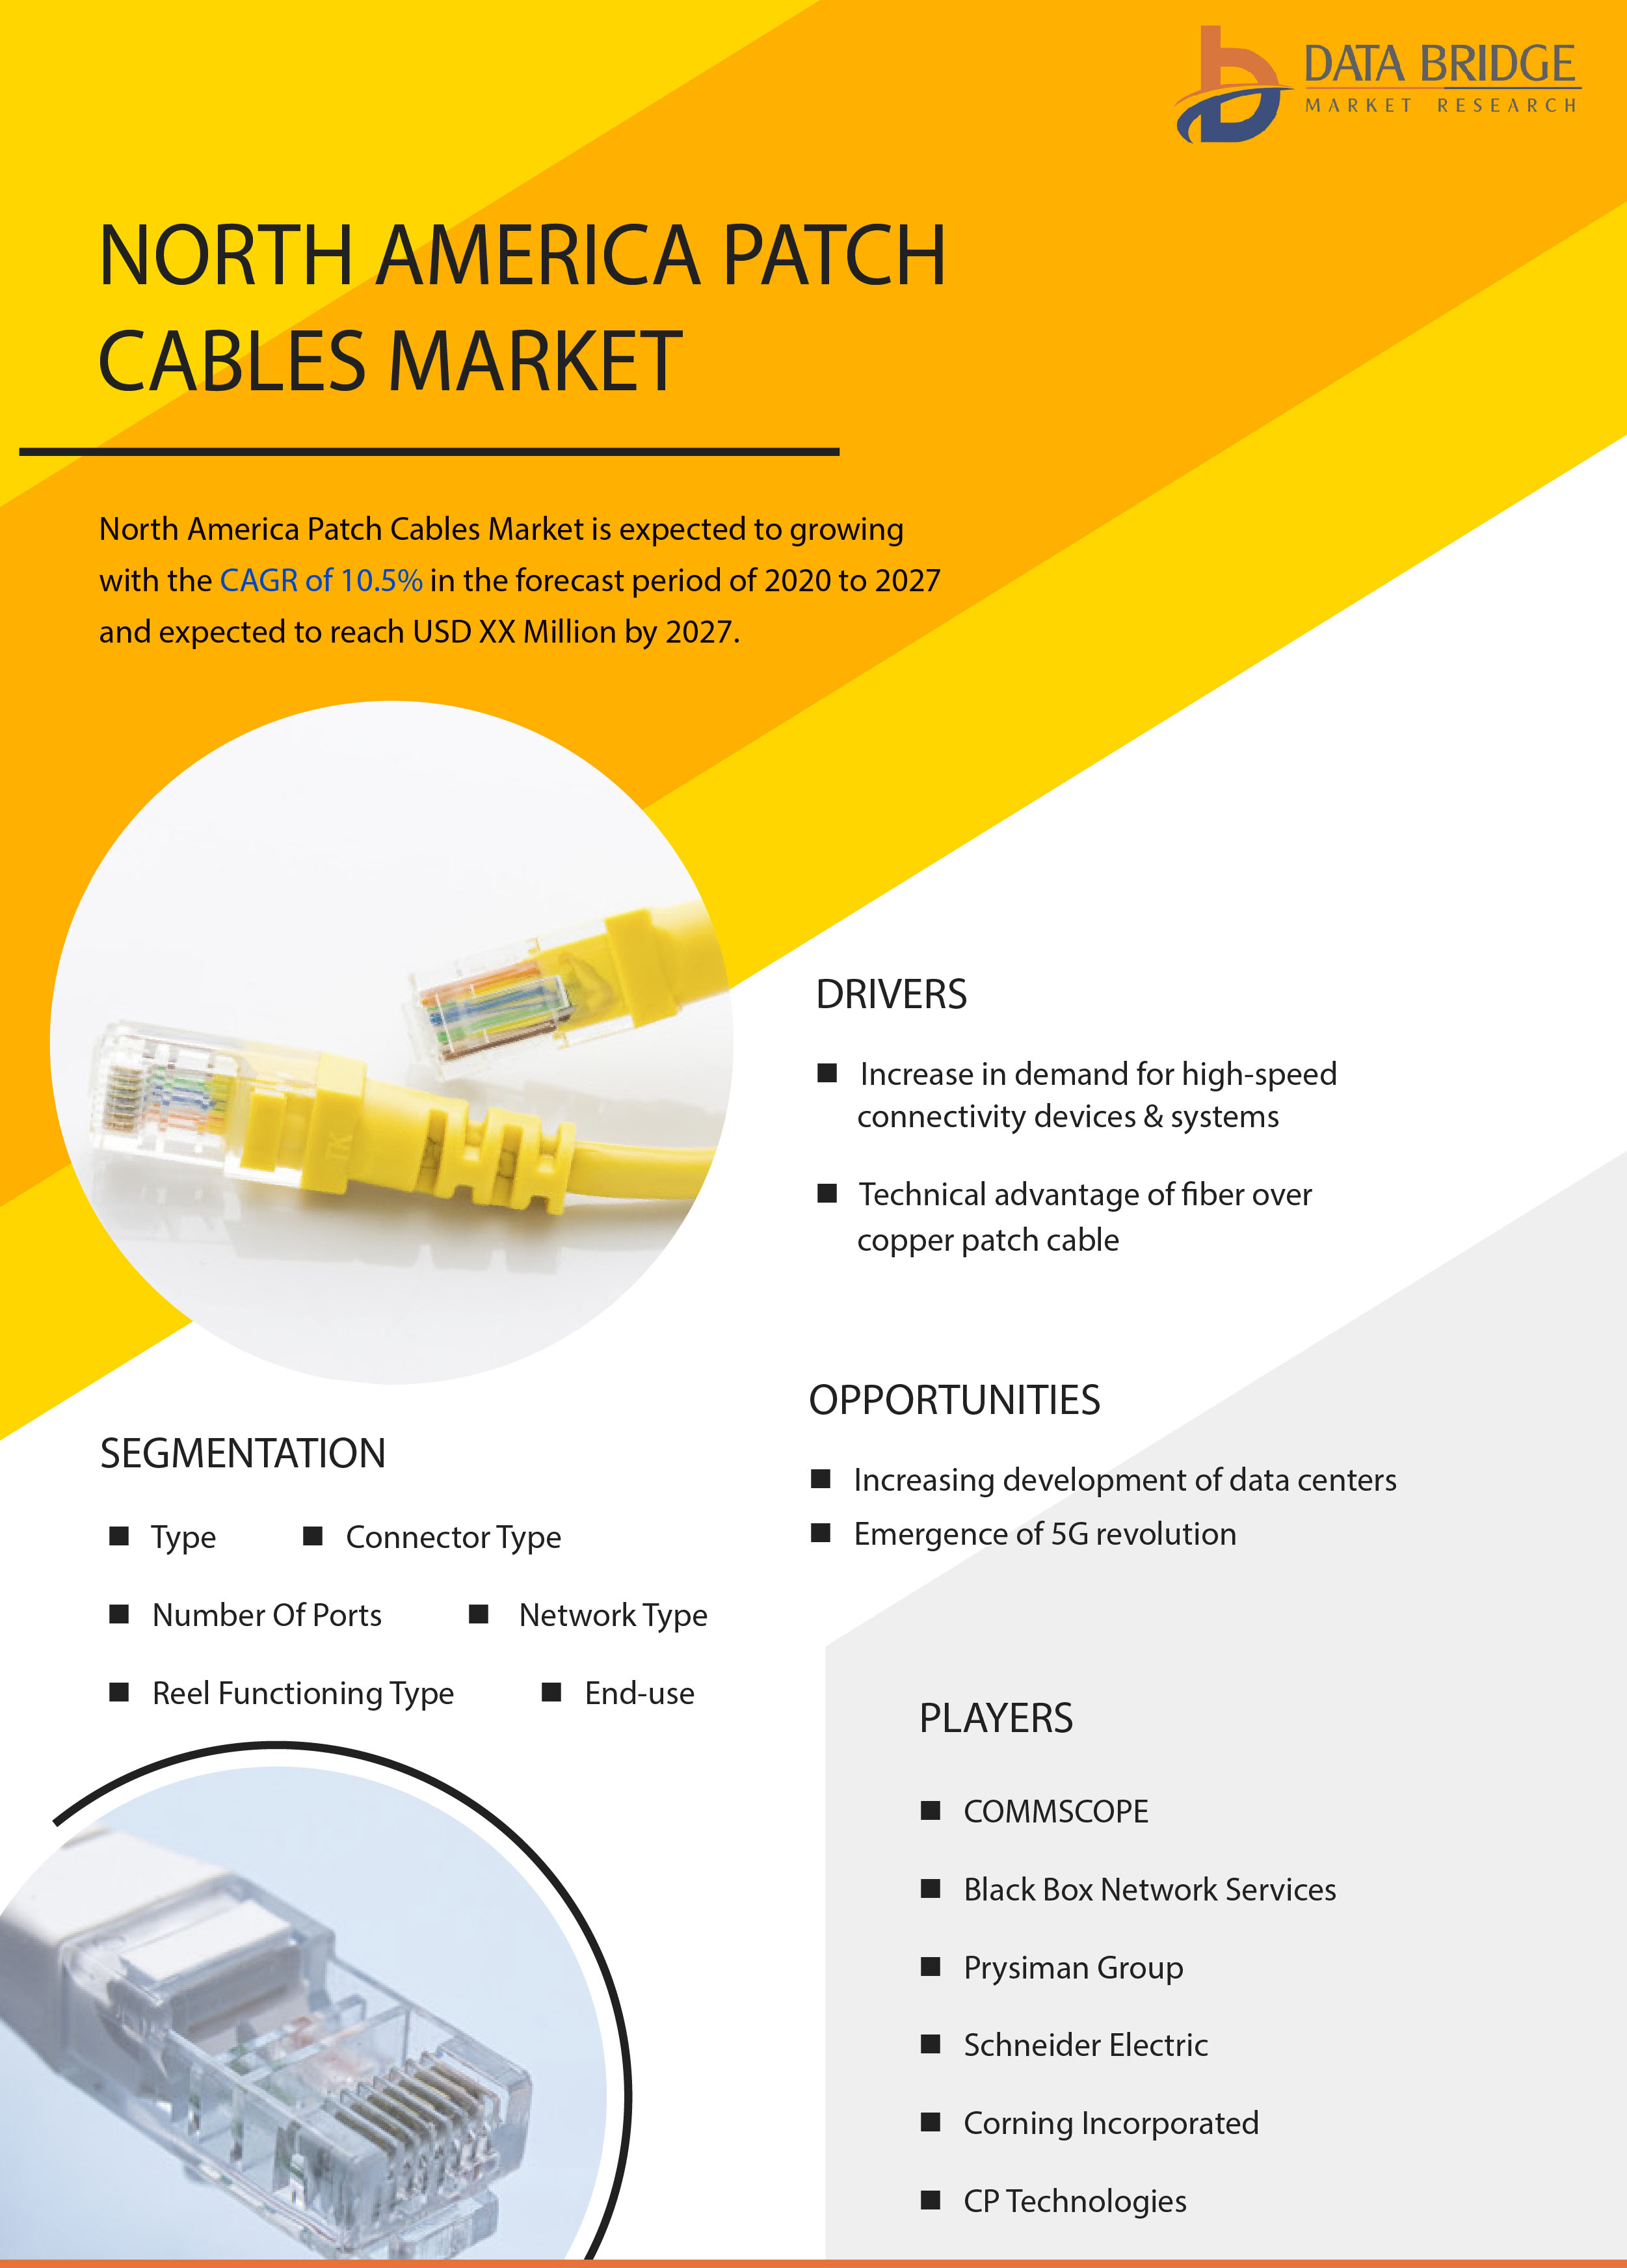 North America Patch Cables Market